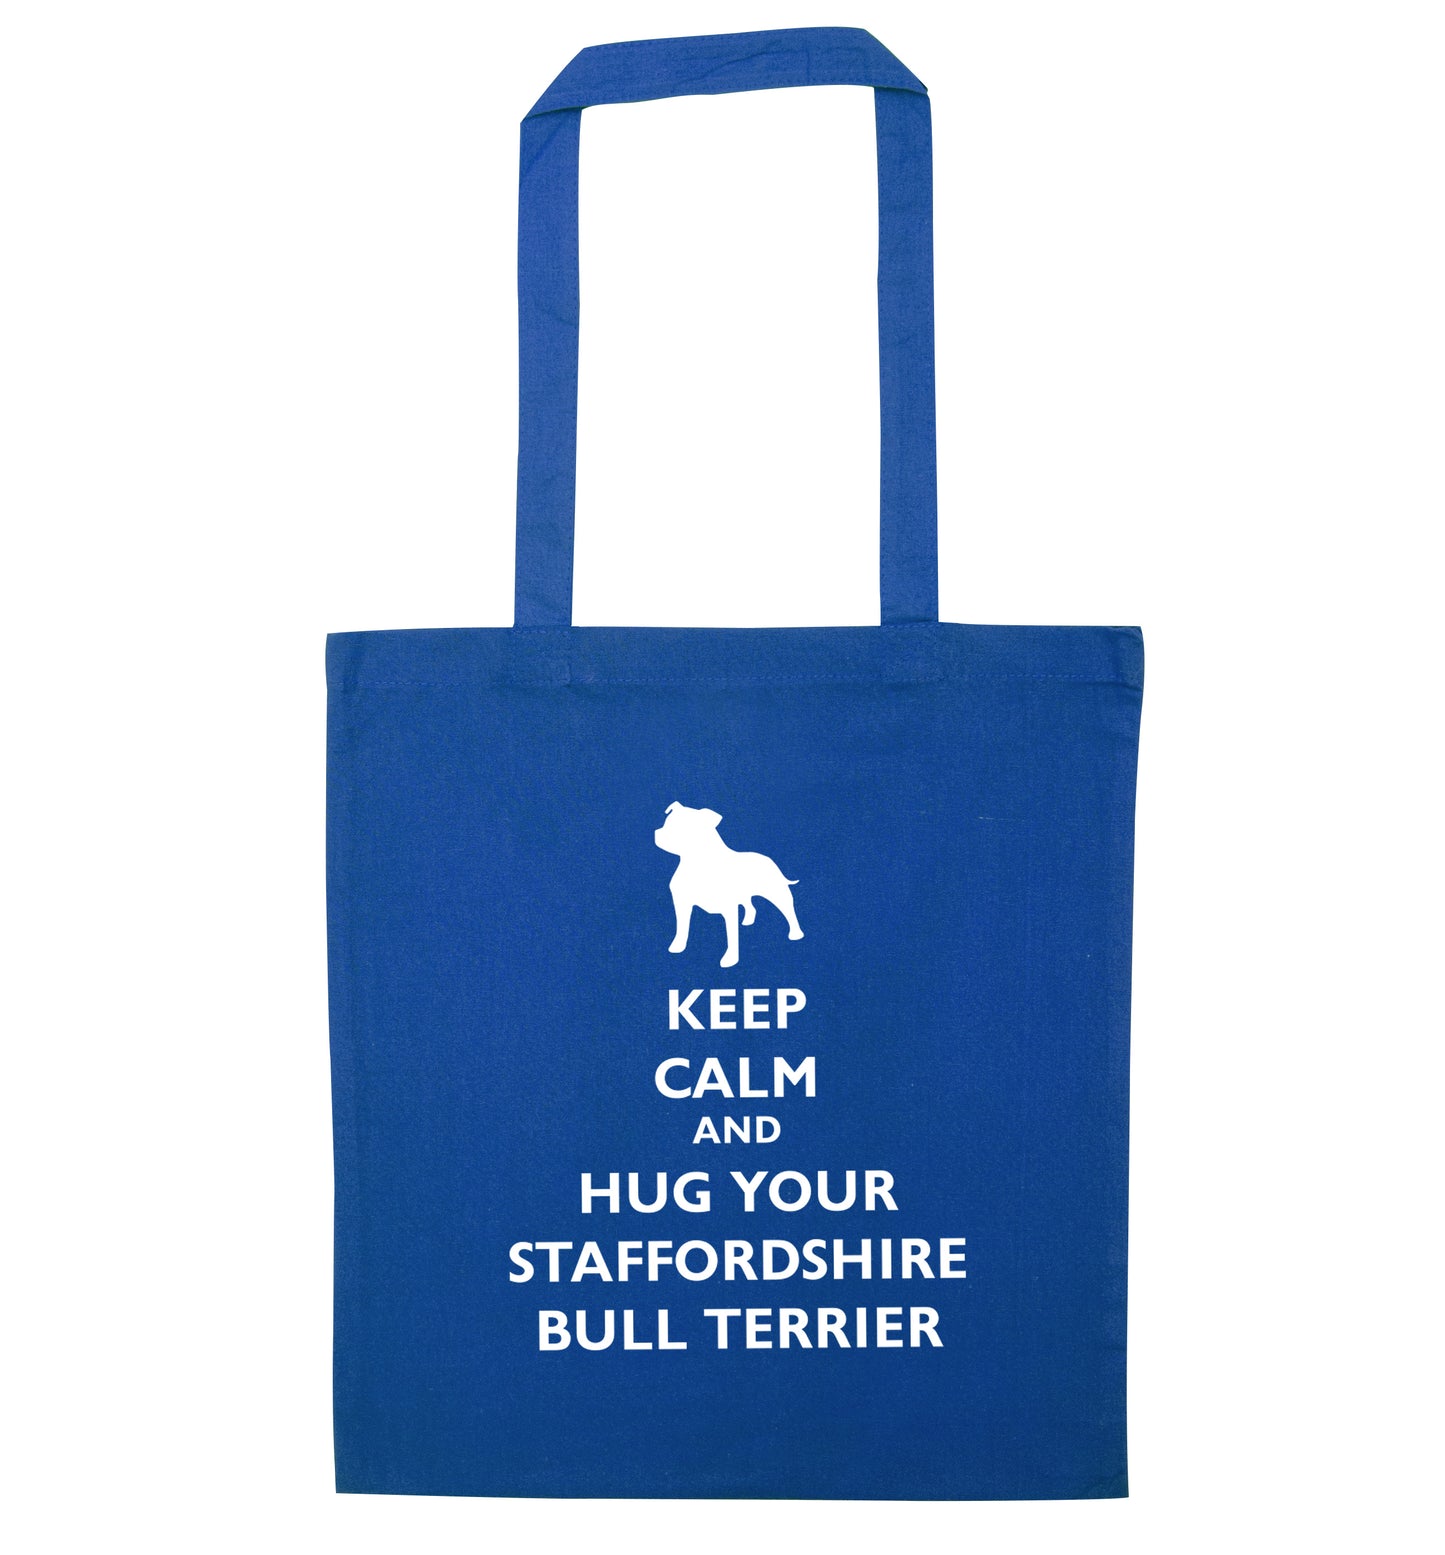 Keep calm and hug your bull terrier  blue tote bag